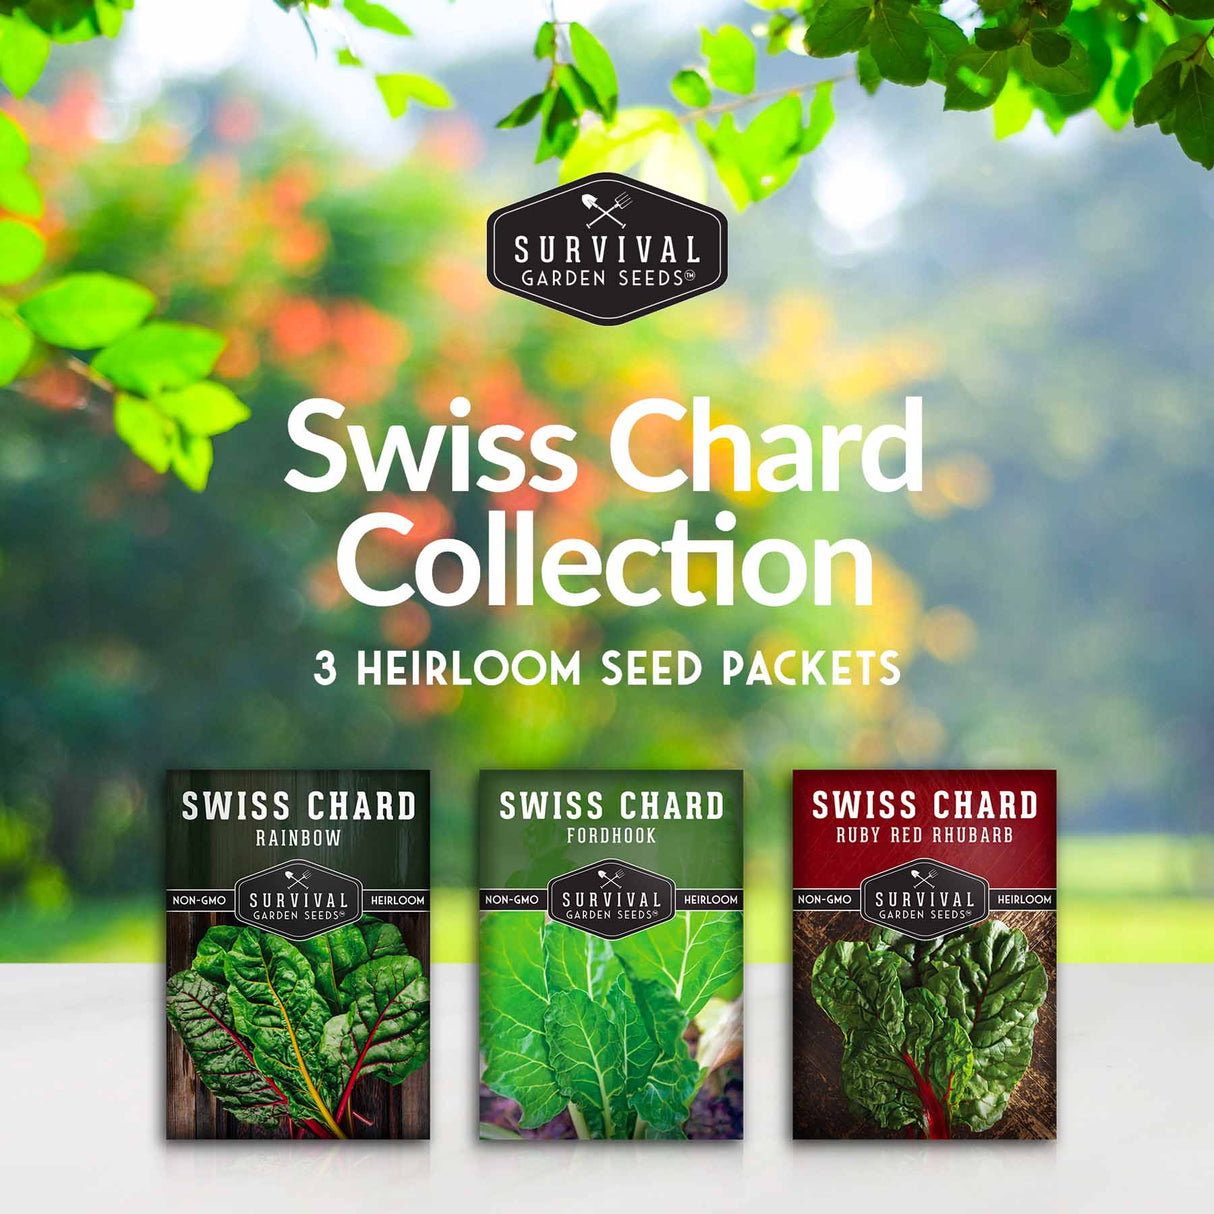 Swiss Chard Collection - 3 heirloom seed packets